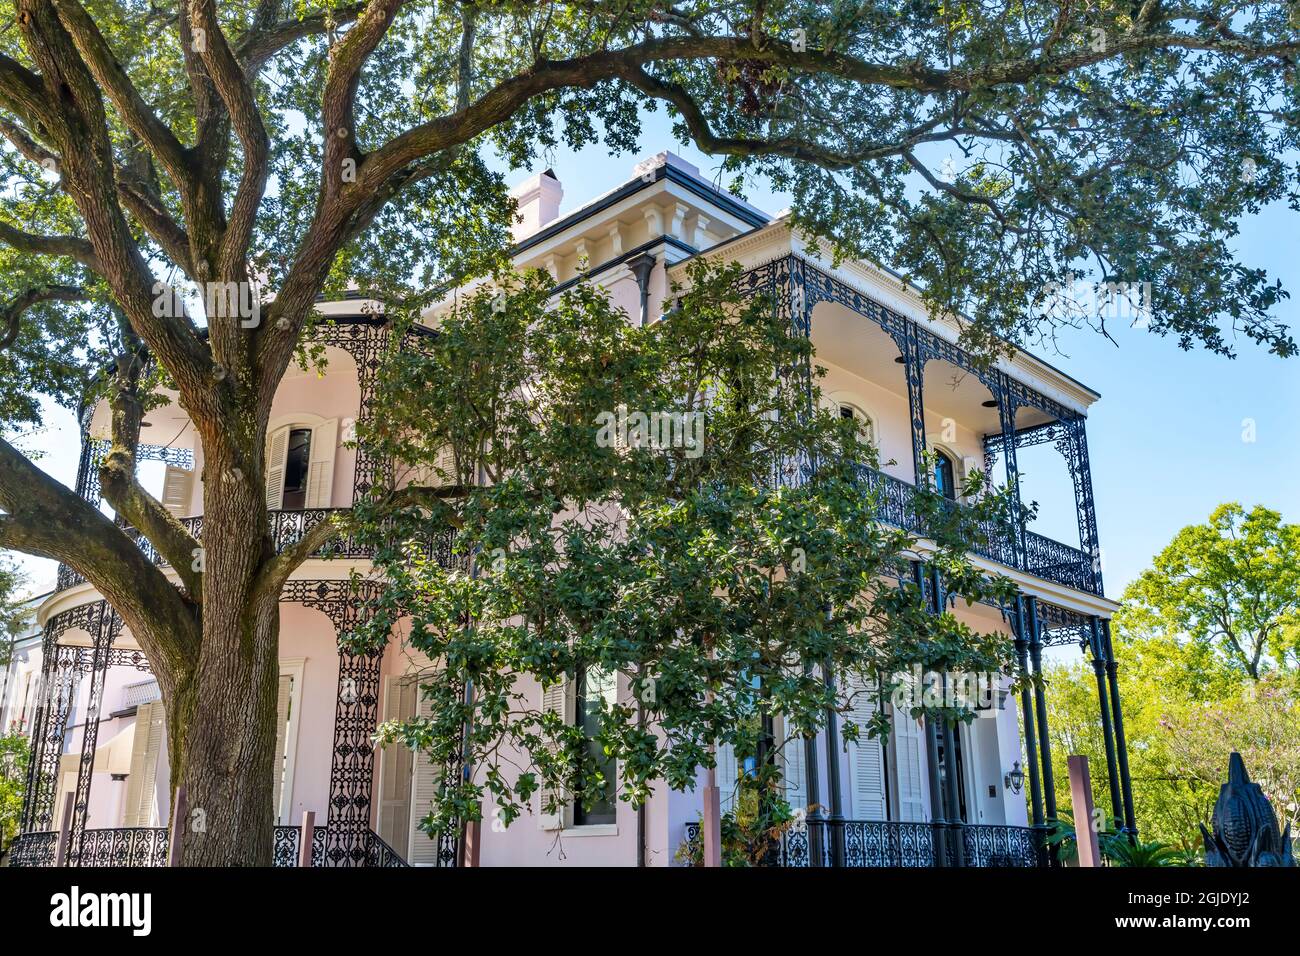 Wrought iron gate, Colonel Short's Villa, Garden District, New Orleans, Louisiana. National Historic District built in the 1800's. (Editorial Use Only Stock Photo